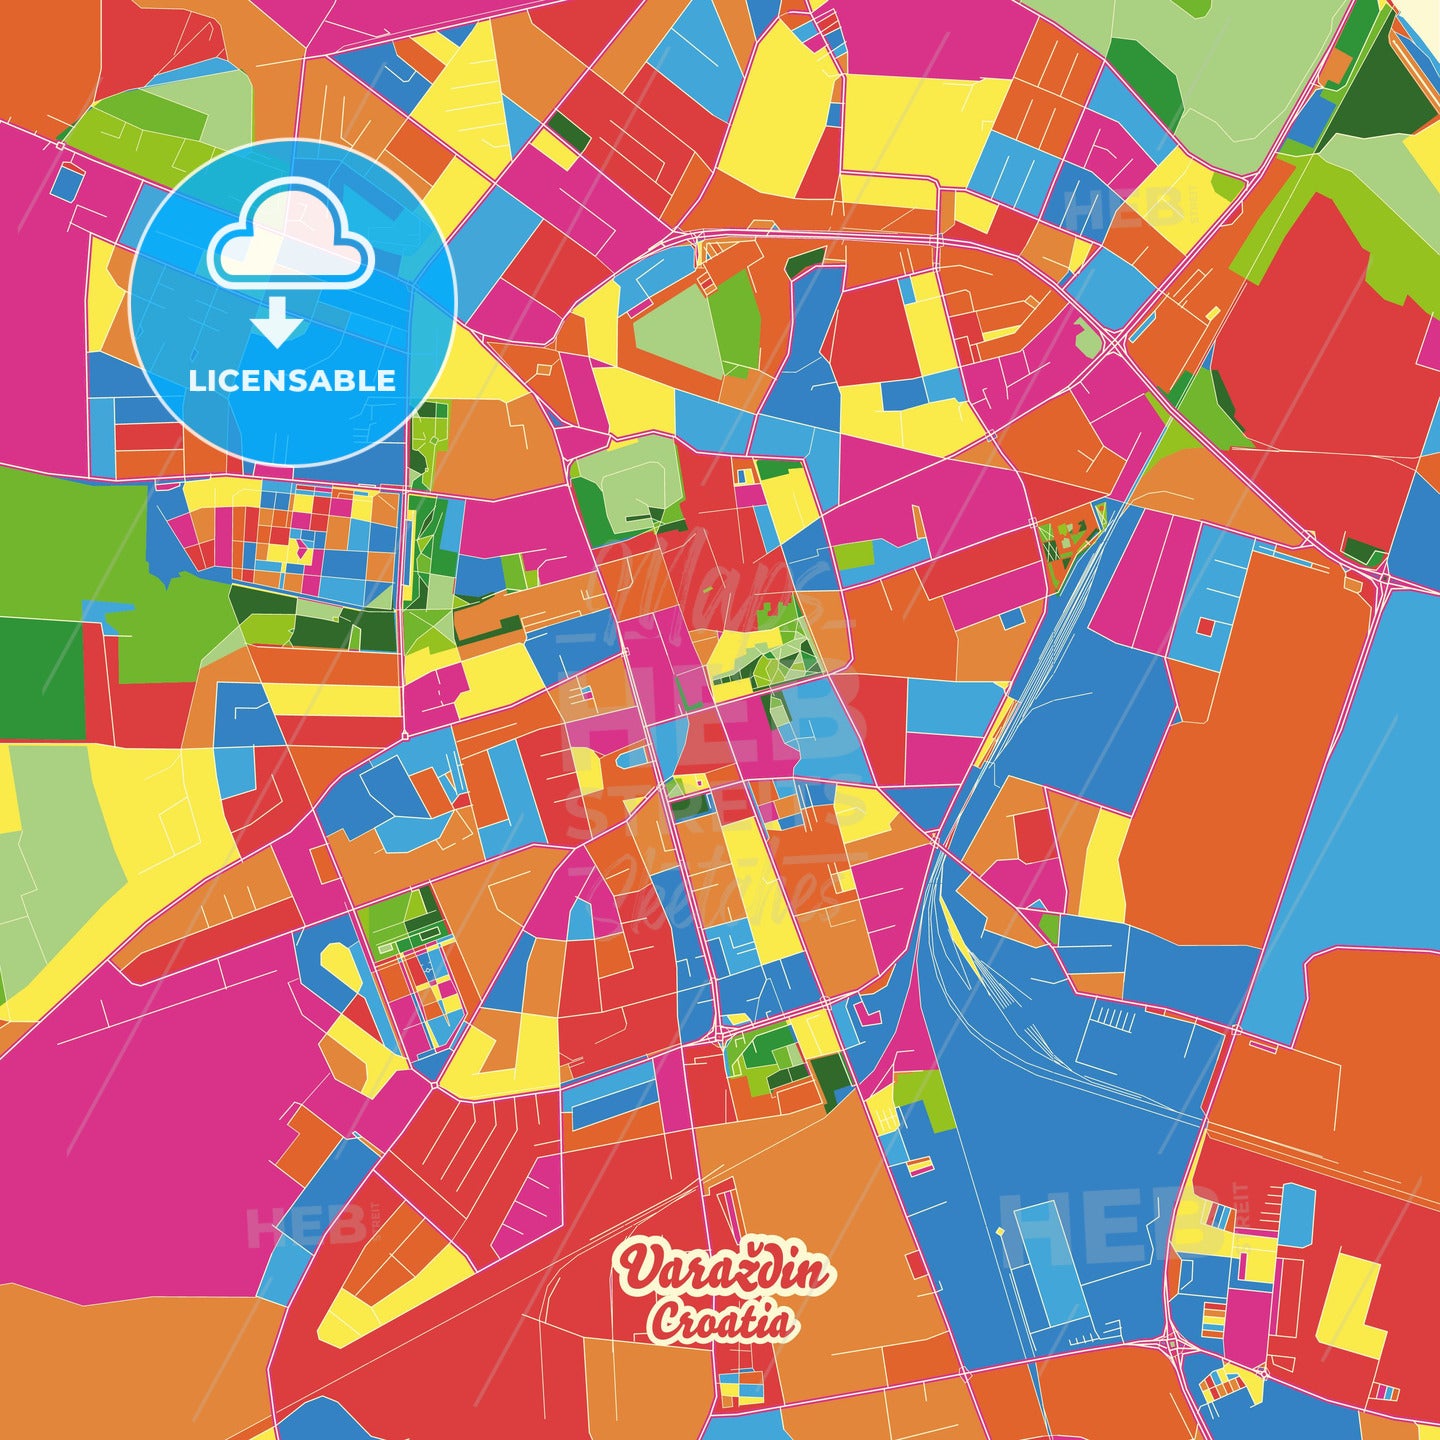 Varaždin, Croatia Crazy Colorful Street Map Poster Template - HEBSTREITS Sketches